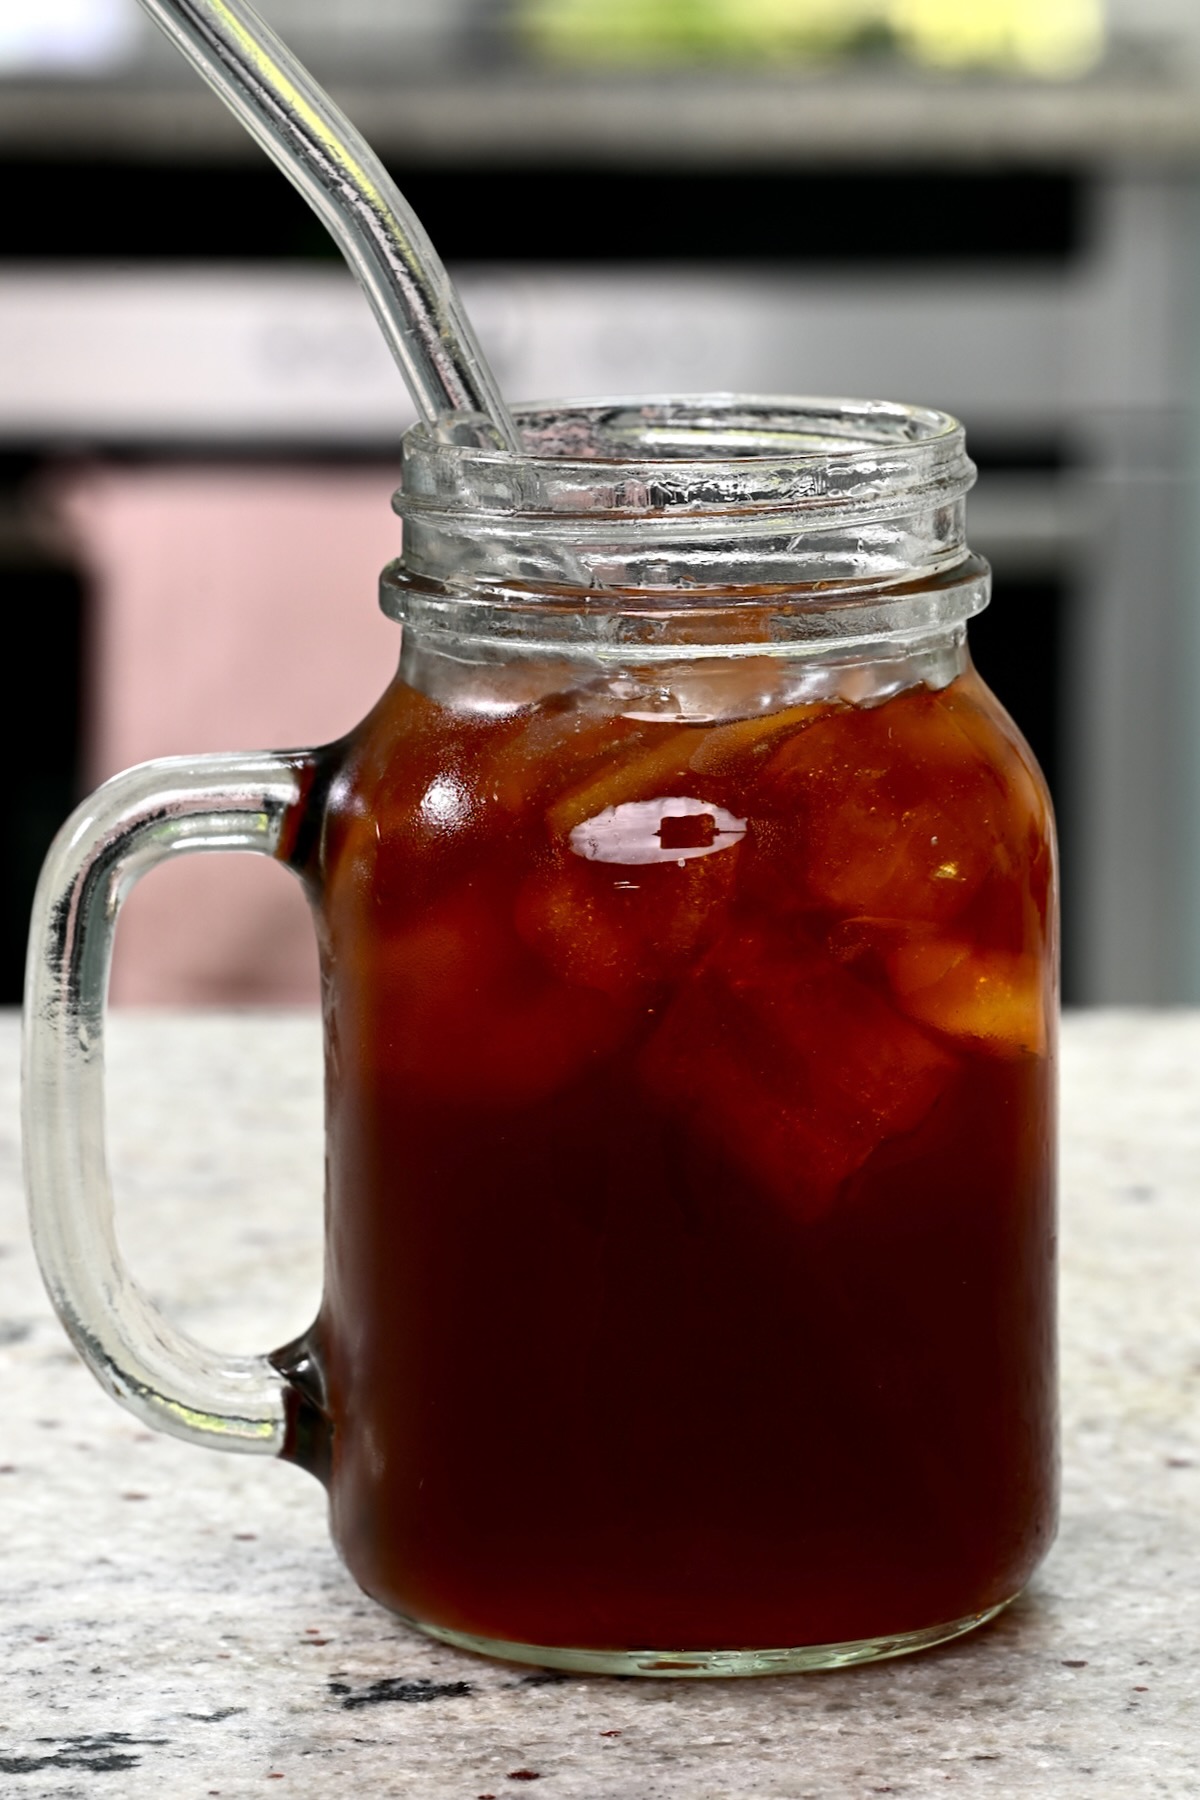 https://www.alphafoodie.com/wp-content/uploads/2022/07/Cold-Brew-Coffee-1-of-2.jpeg